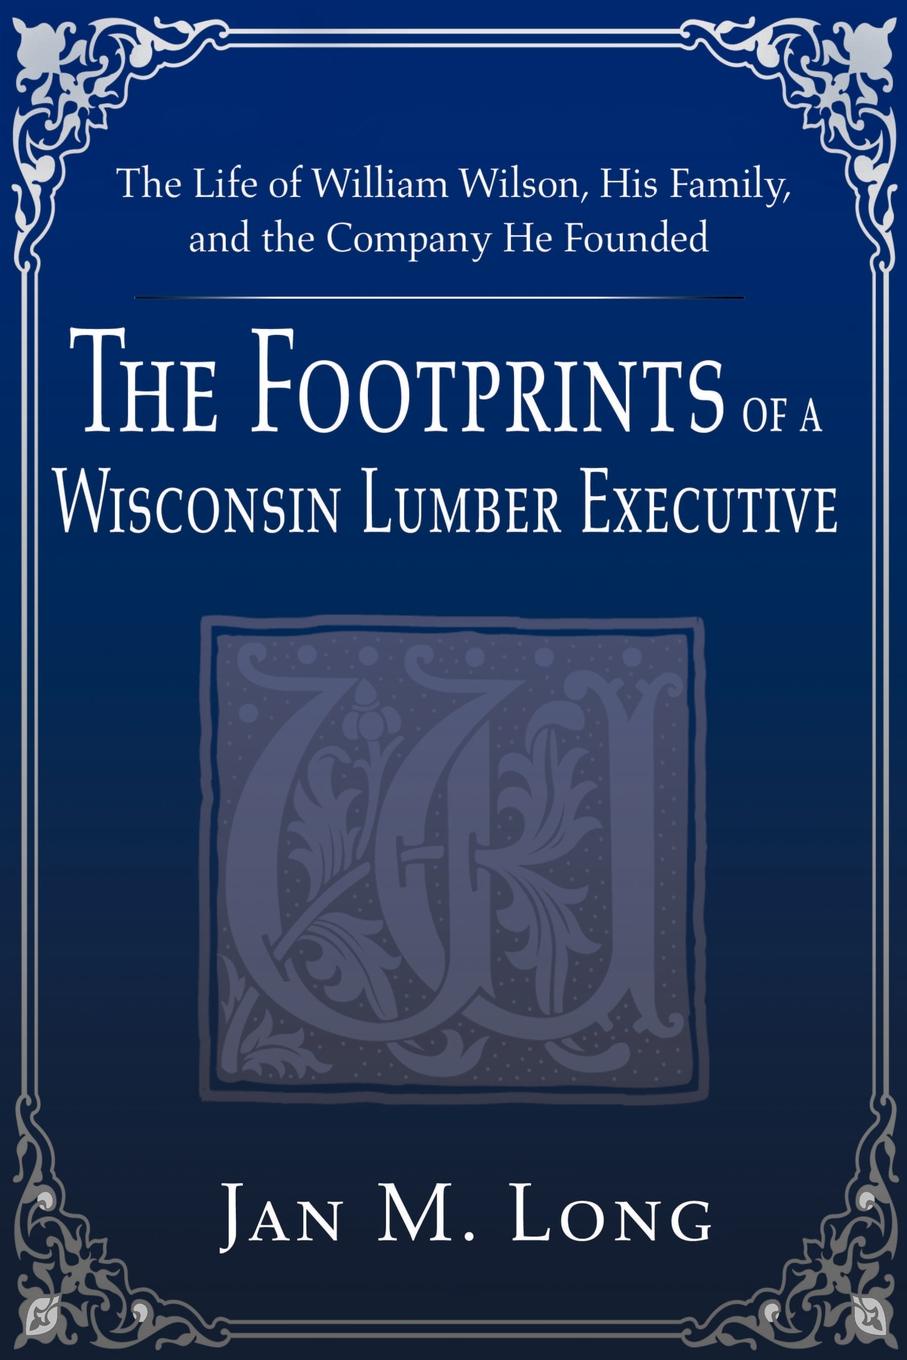 The Footprints of a Wisconsin Lumber Executive. The Life of William Wilson, His Family, and the Company He Founded